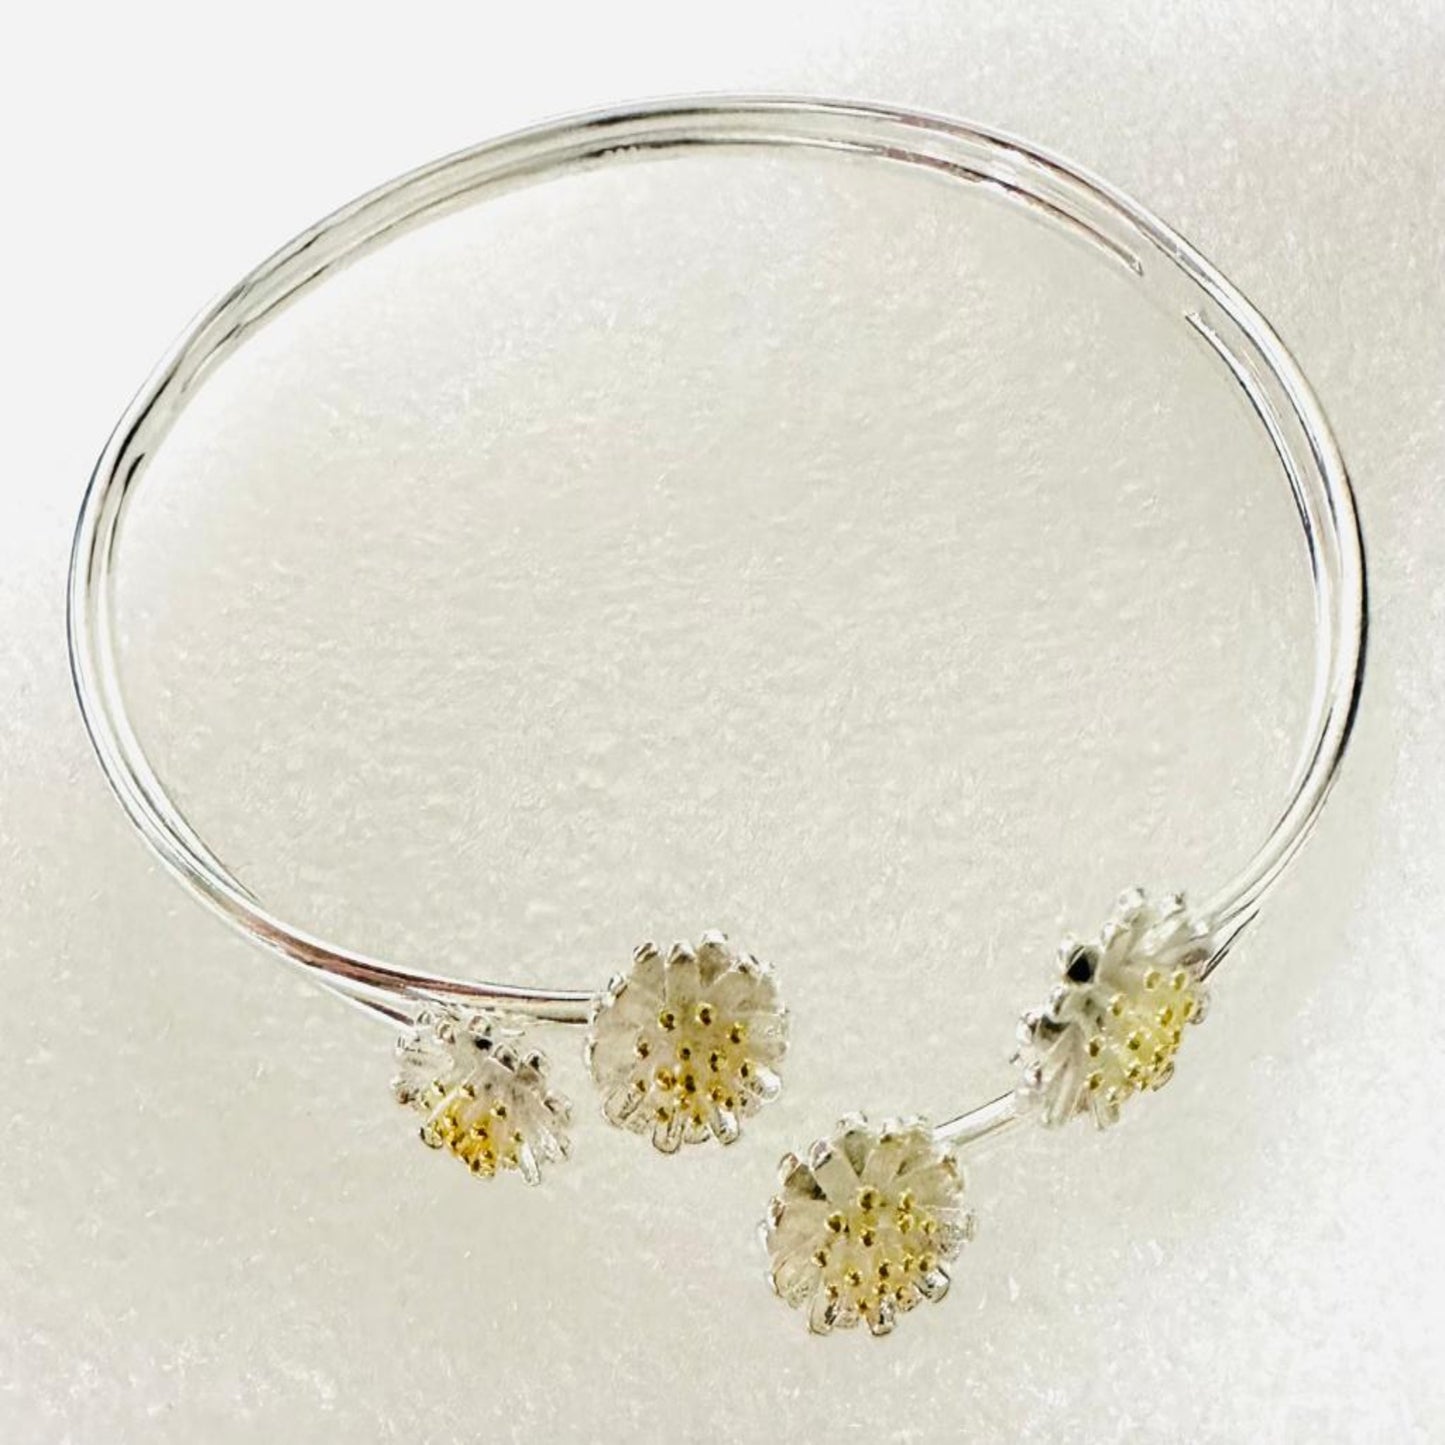  DAISY Silver double-layered adjustable bangle